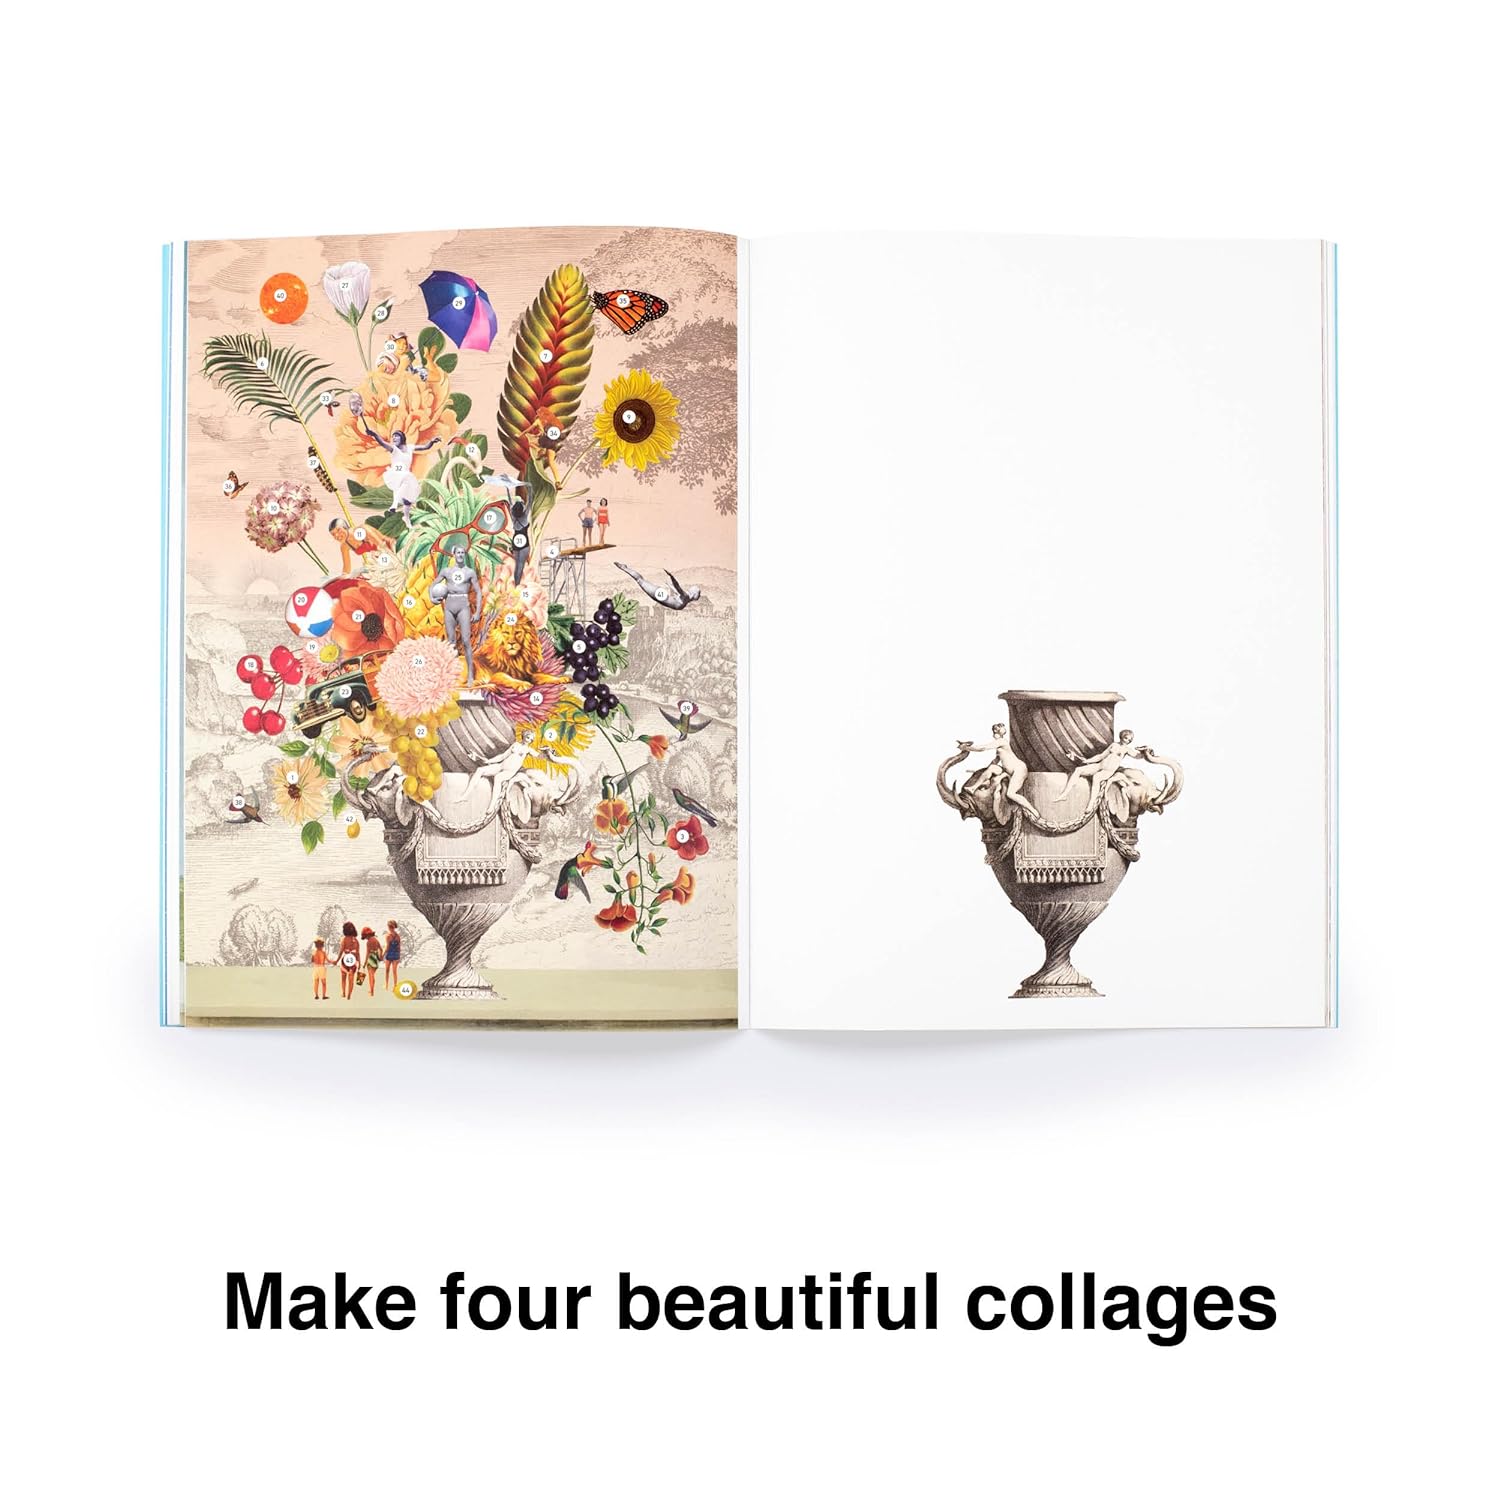 Four Seasons : Create Four Elegant Collages with the Images in this Surprising Kit